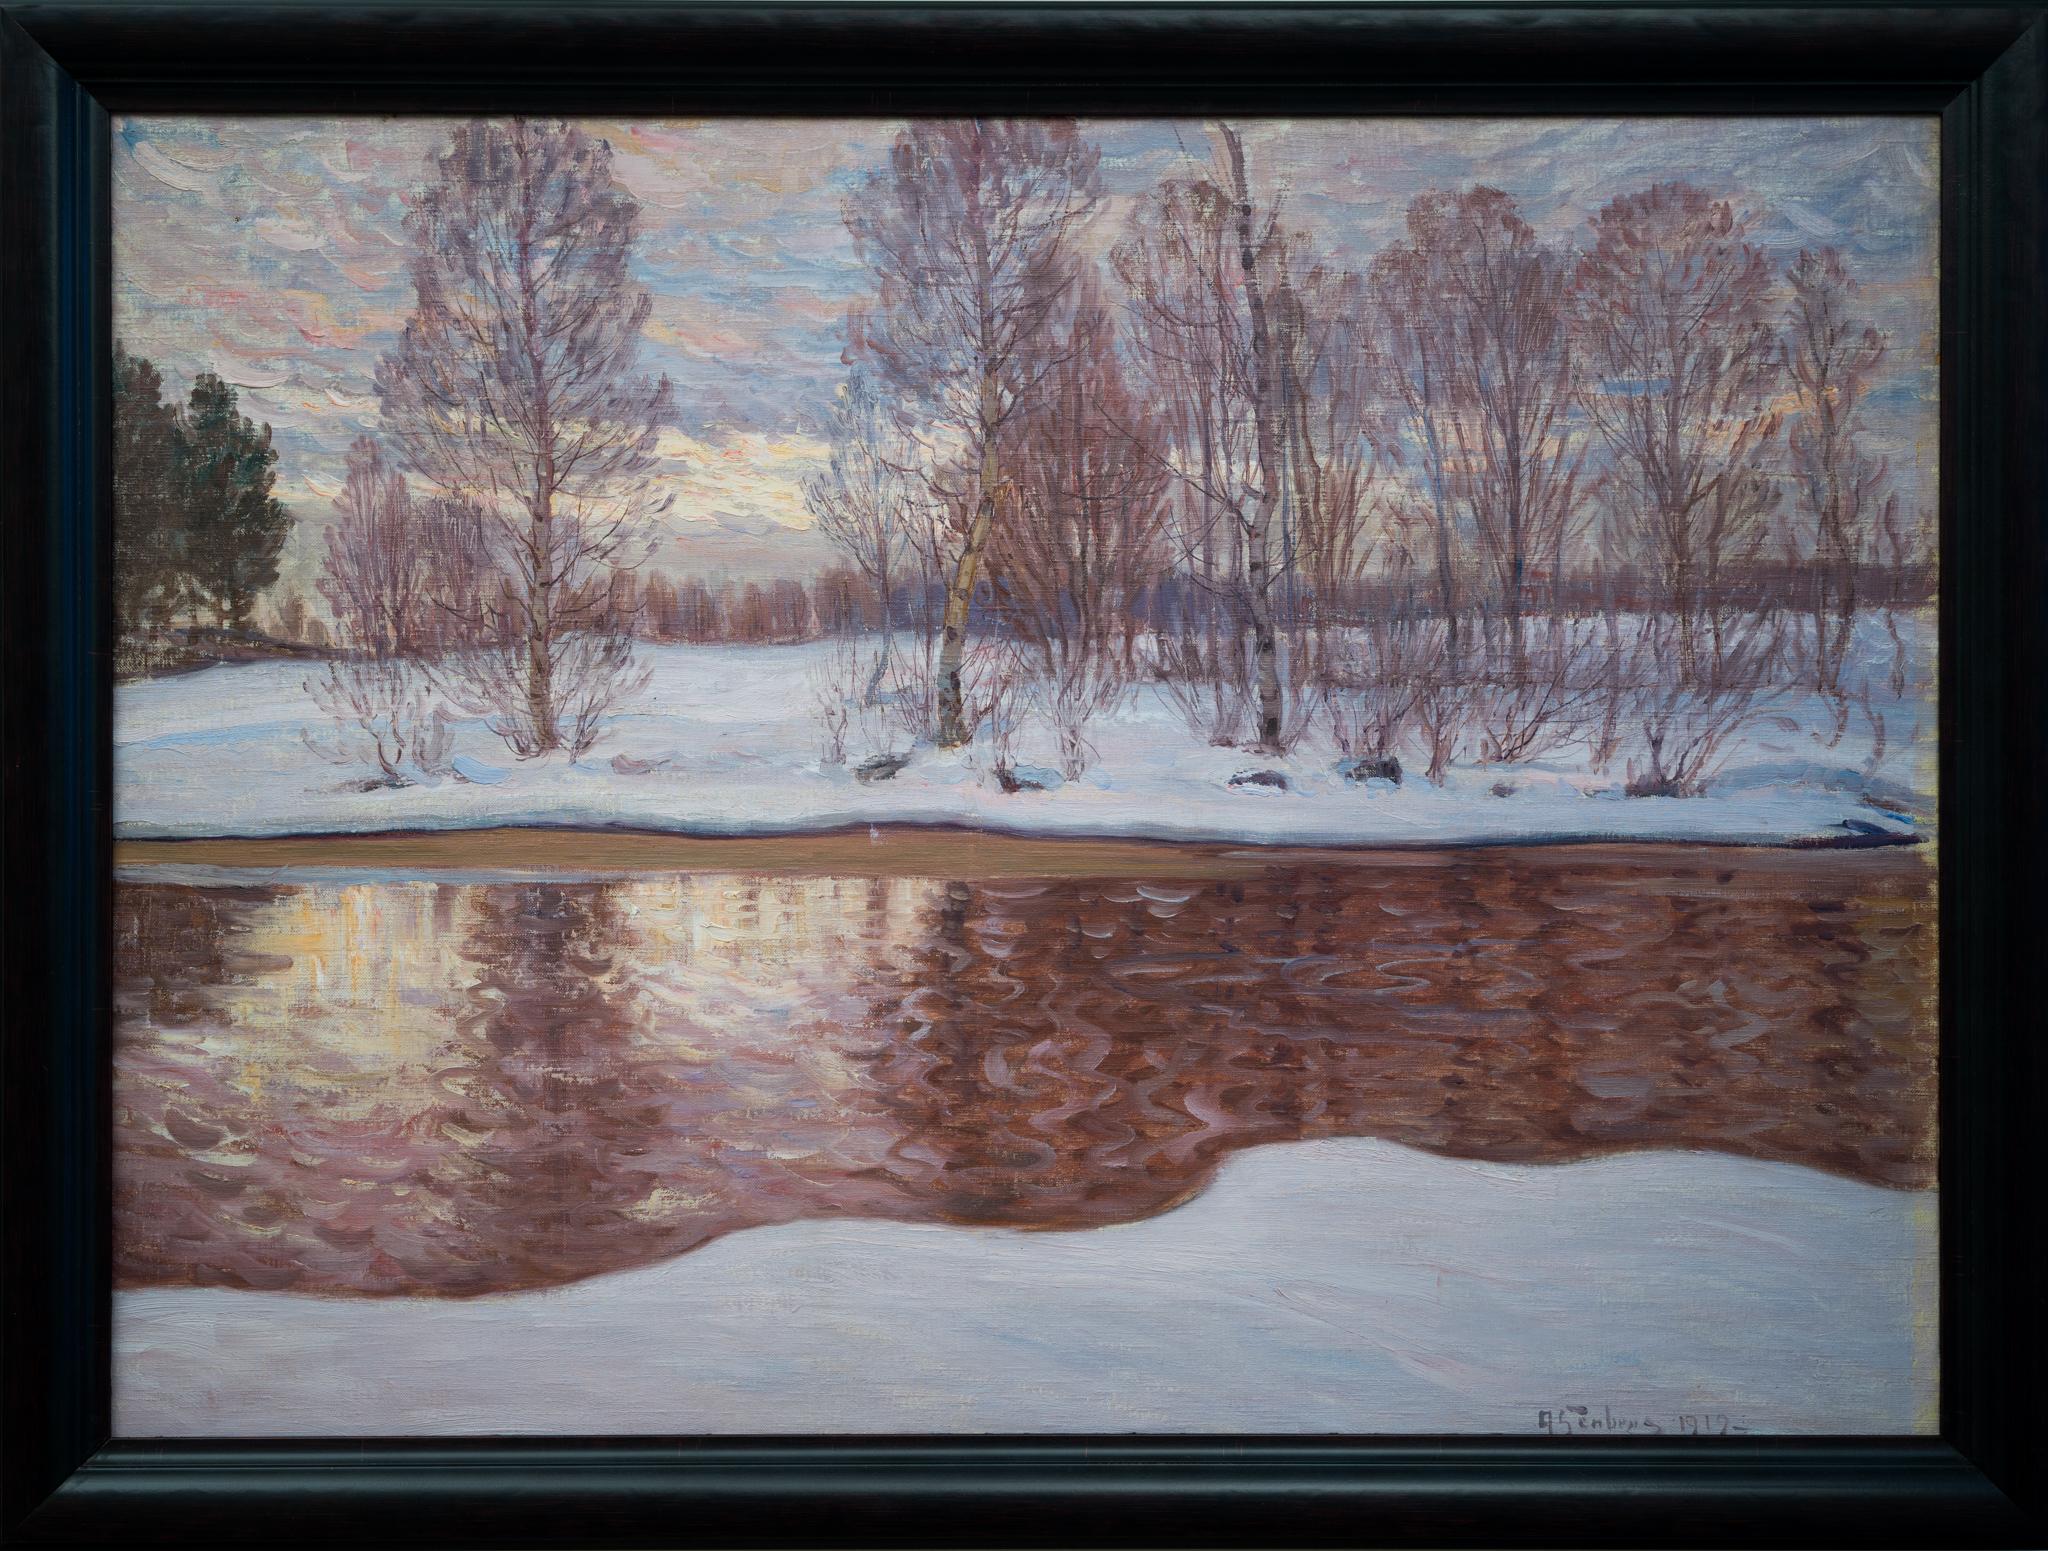 We are honored to present for sale a captivating winter landscape painting by Anton Jonsson Genberg, completed in 1919. This piece is a pristine representation of Genberg's artistry, known for his naturalistic depiction of the Scandinavian